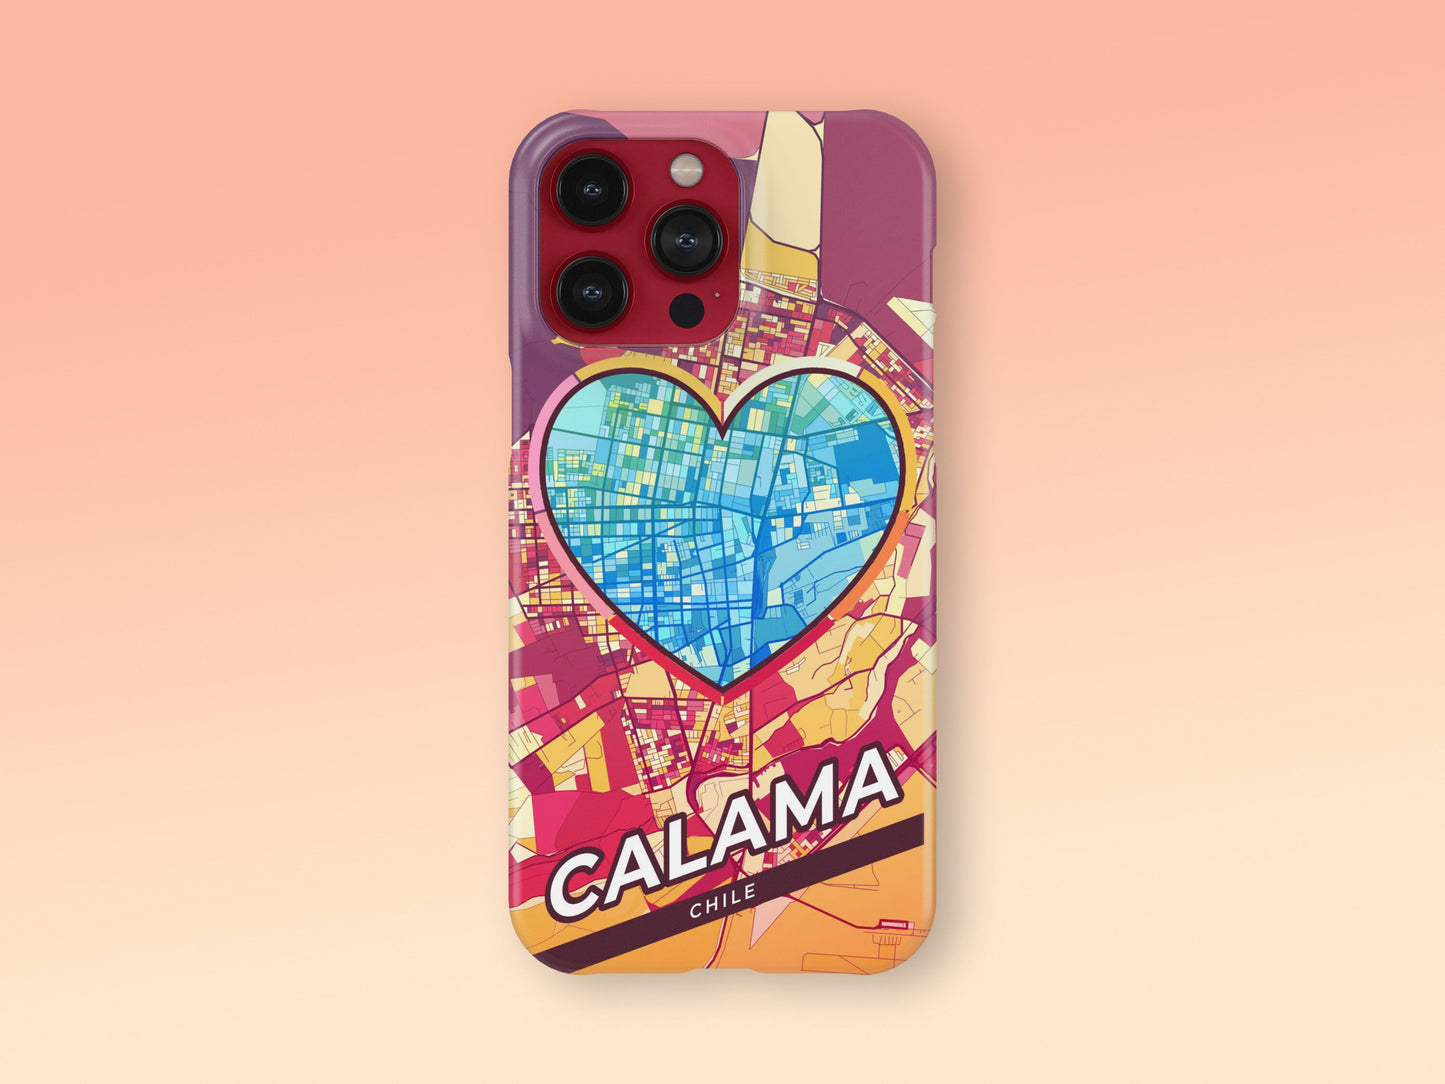 Calama Chile slim phone case with colorful icon. Birthday, wedding or housewarming gift. Couple match cases. 2